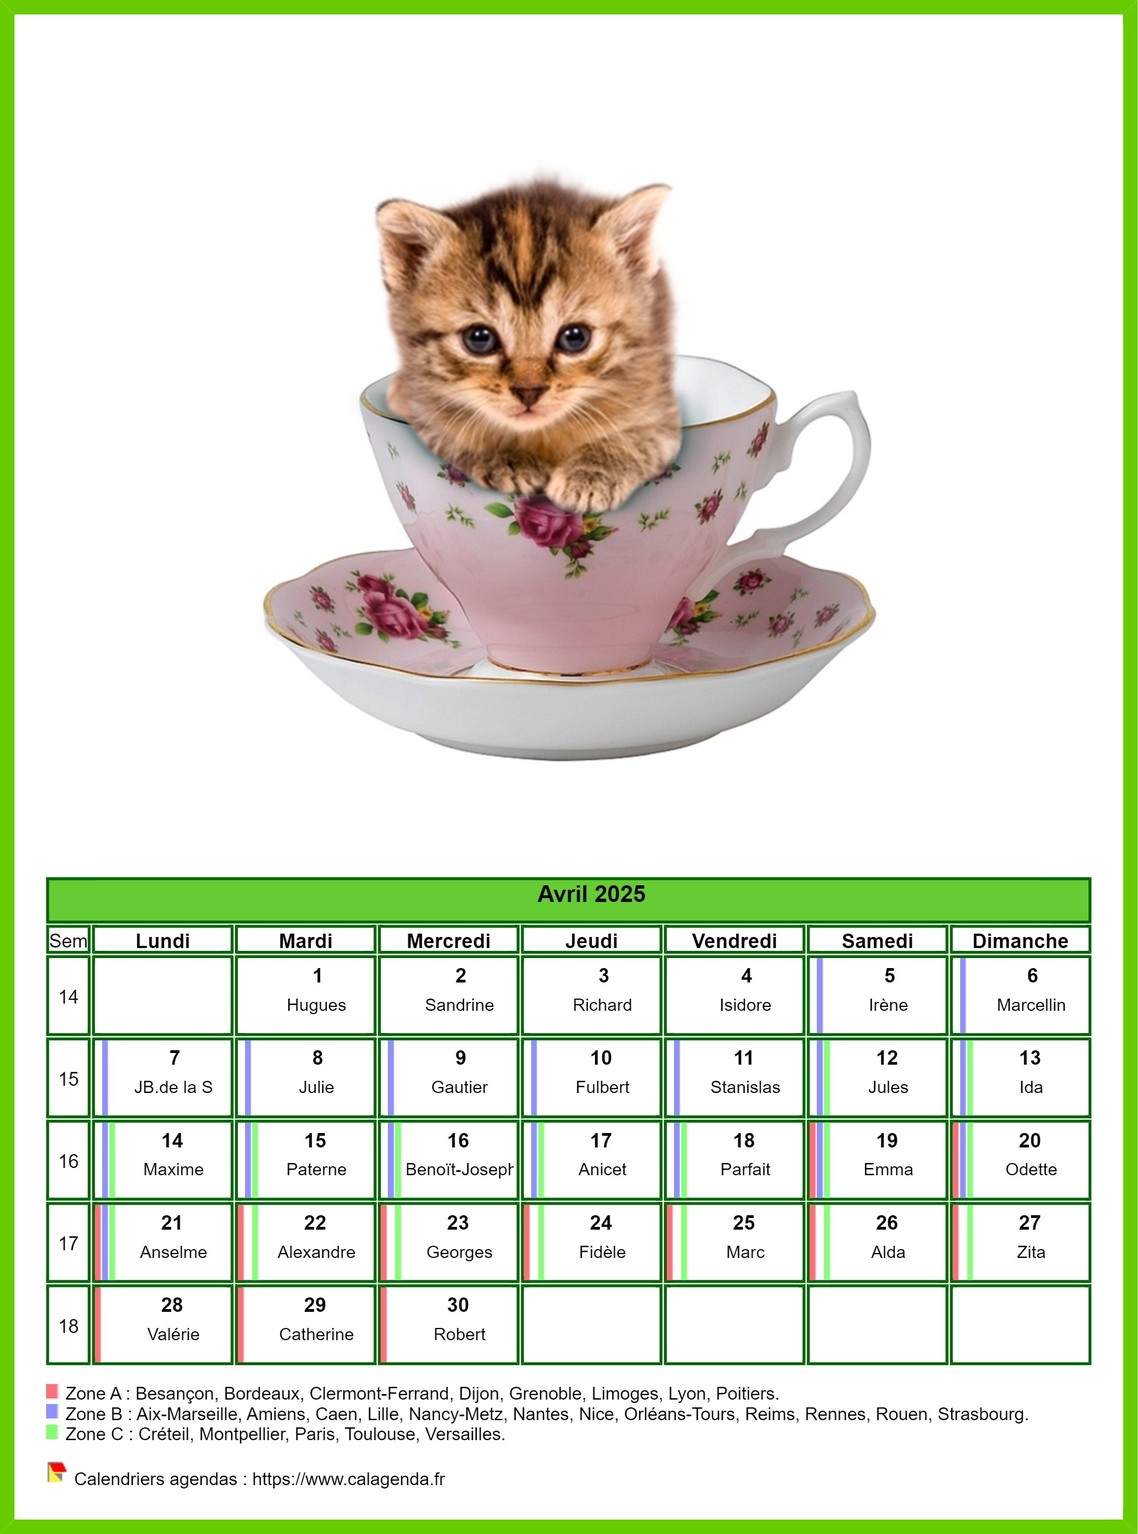 Calendrier avril 2025 chats